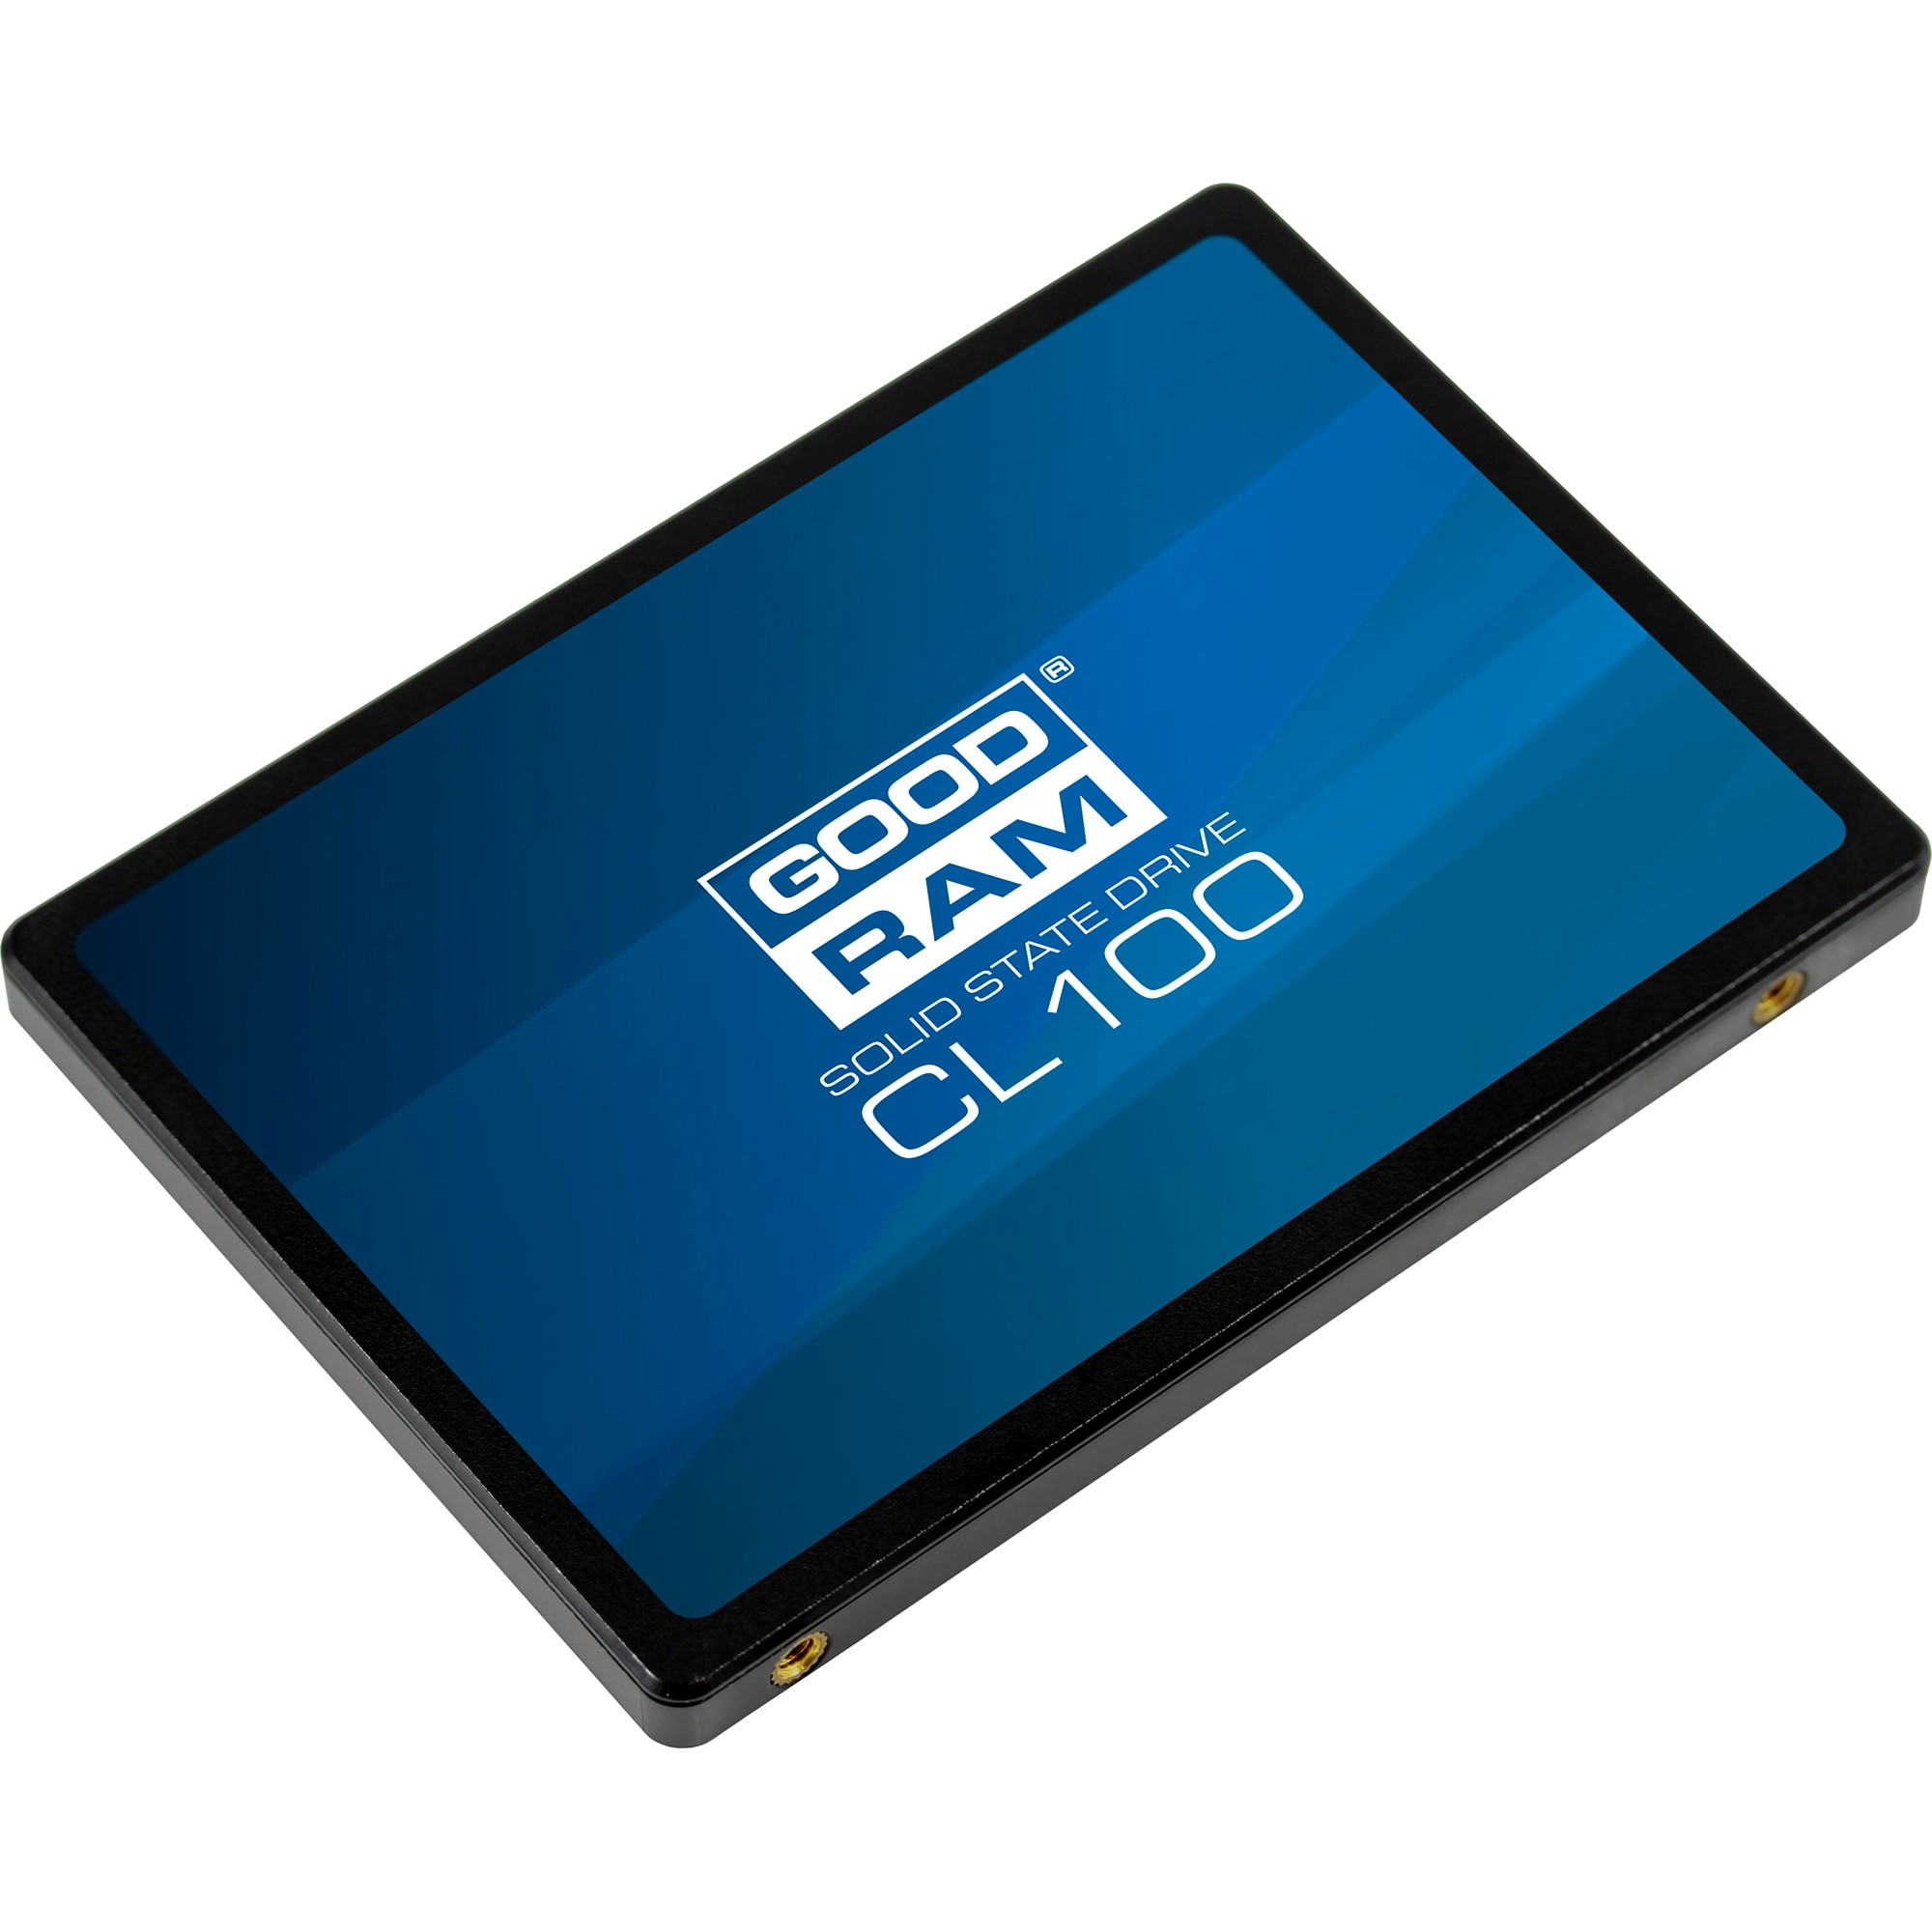 Drive (SSD) GOODRAM CL100, 120GB, - eMAG.ro